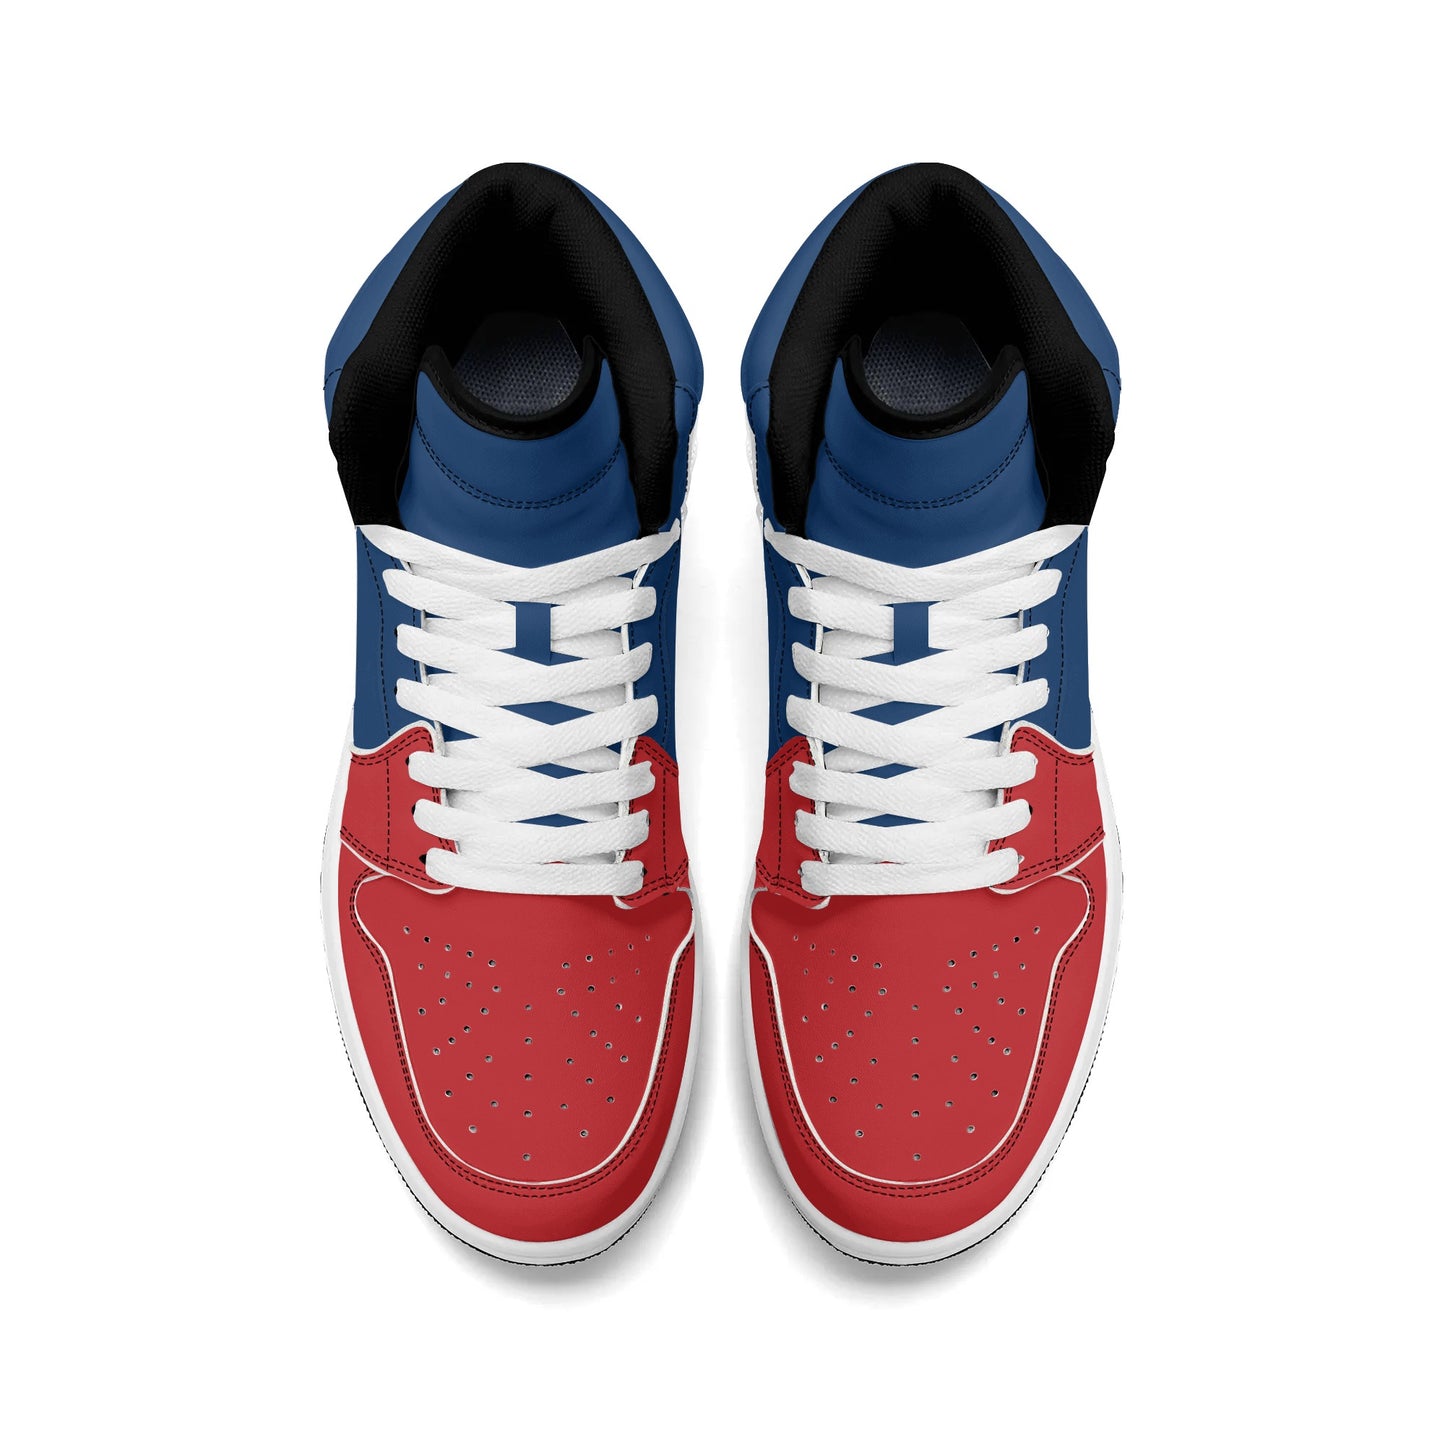 Red and Blue High Tops